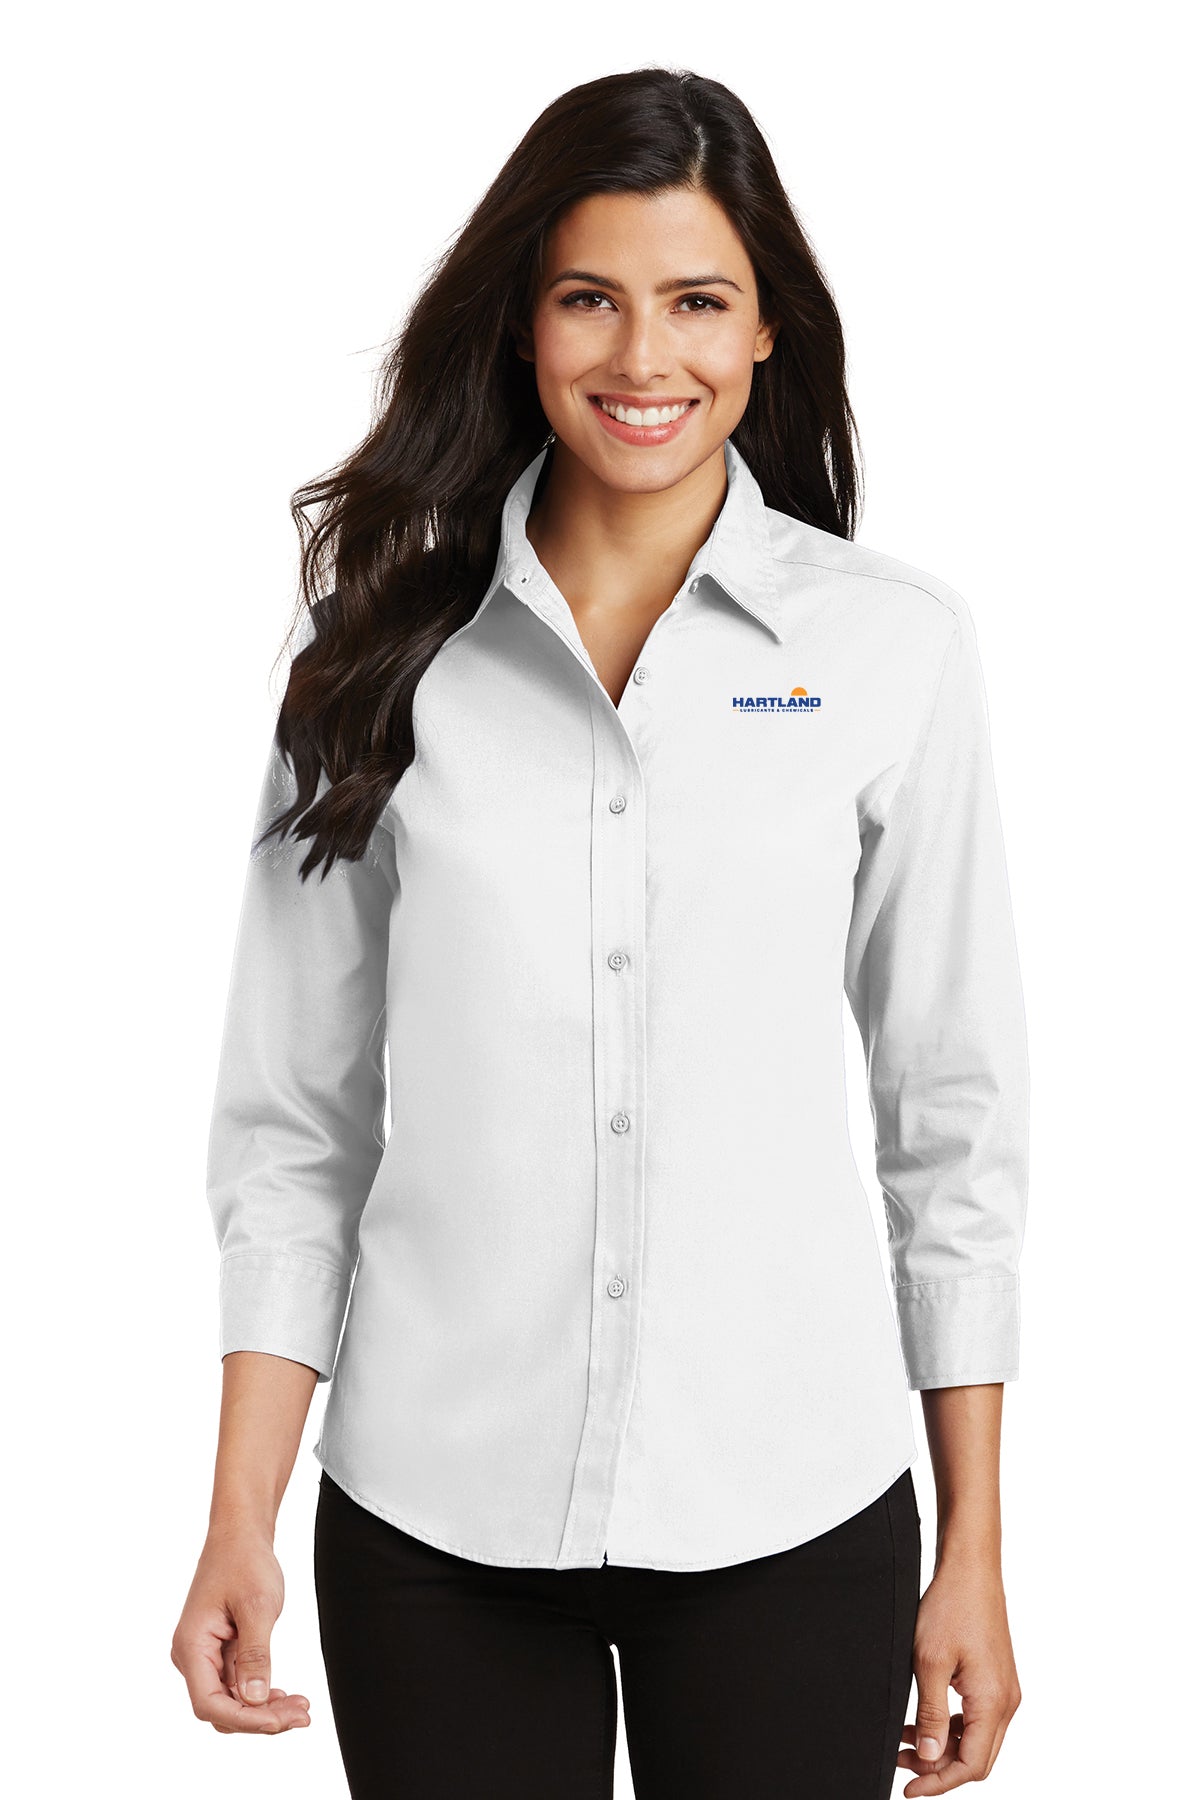 Hartland Lubricants and Chemicals Ladies Button Up Shirt